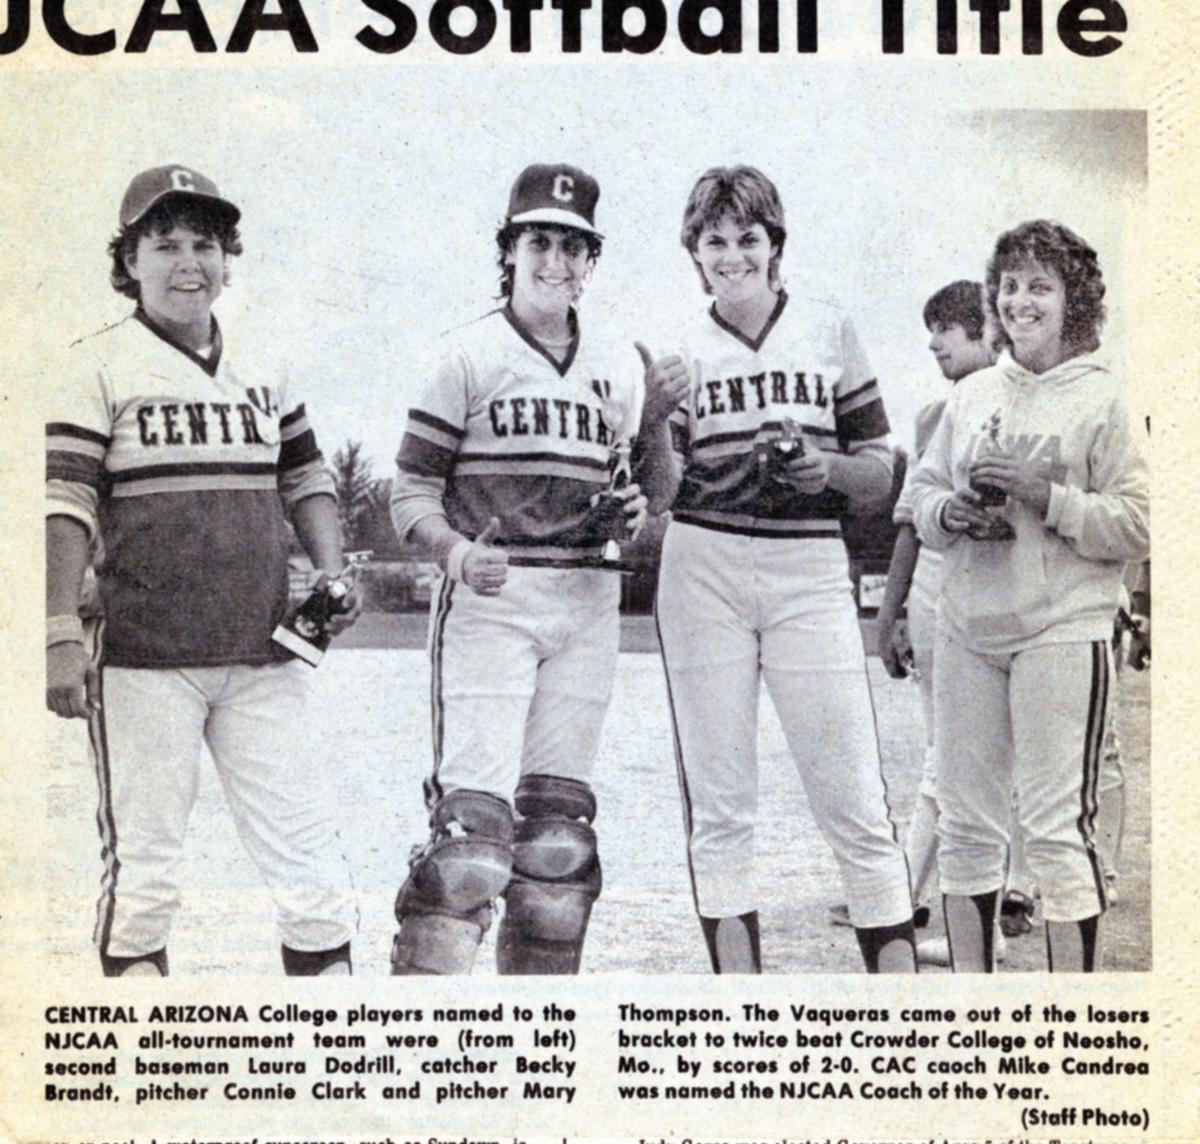 Looking back: CAC softball wins 1st national title in 1984